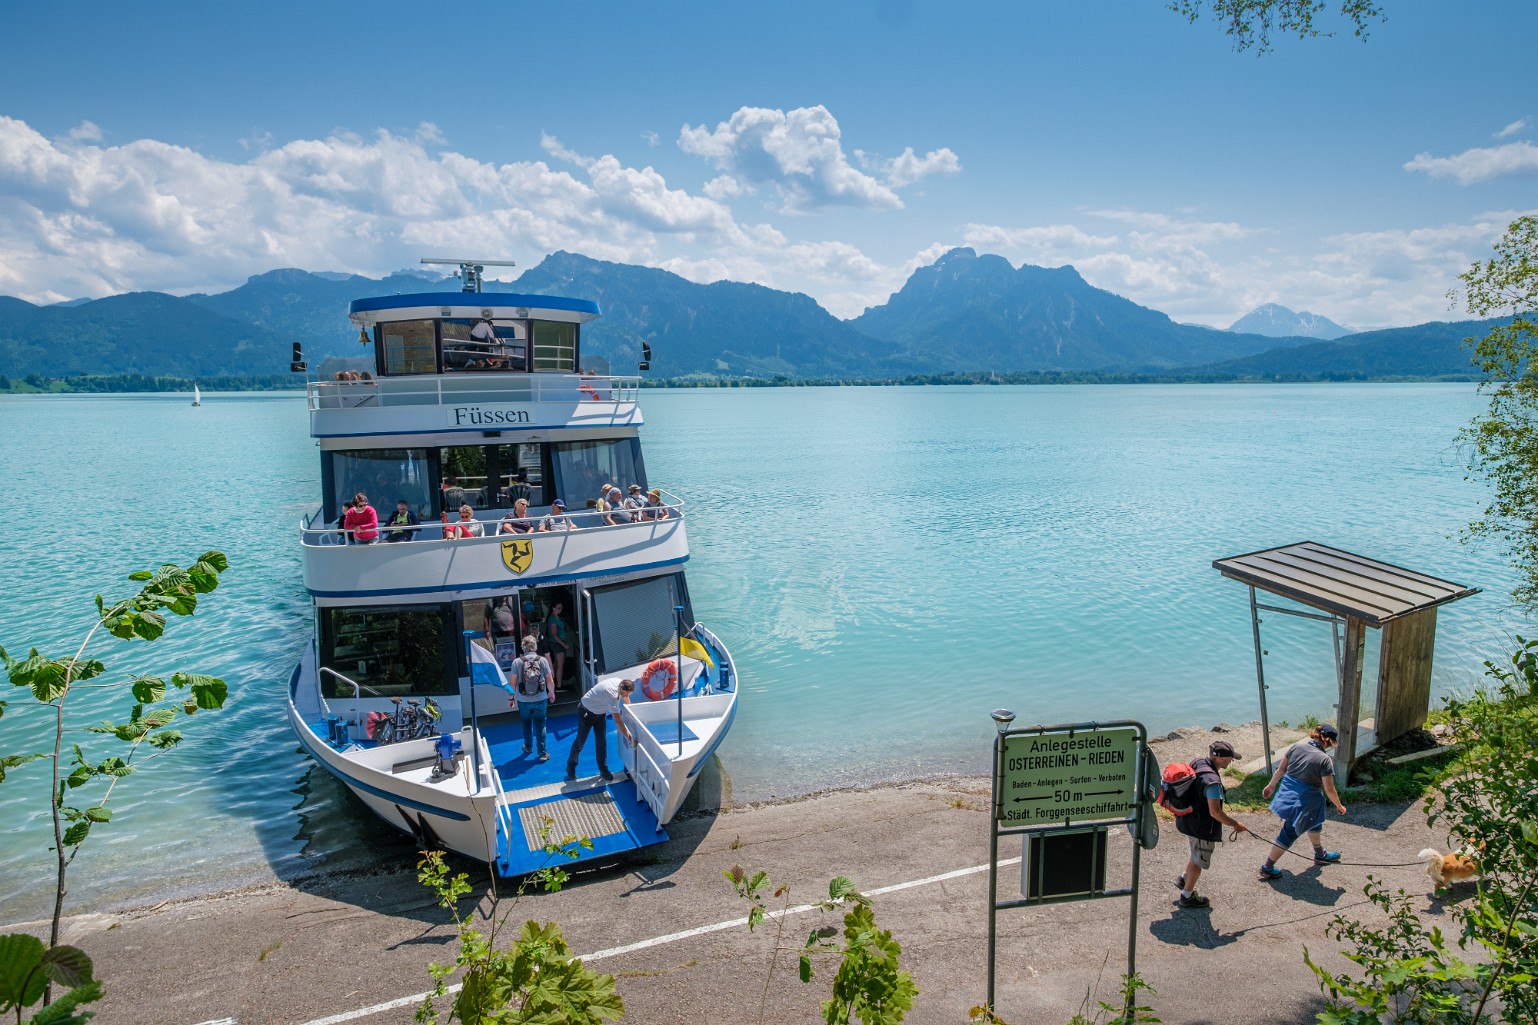 Forggensee_0473_2023-06-X-T4_13,8mm_f6,4_640s_160 ISO_LR_4kPx